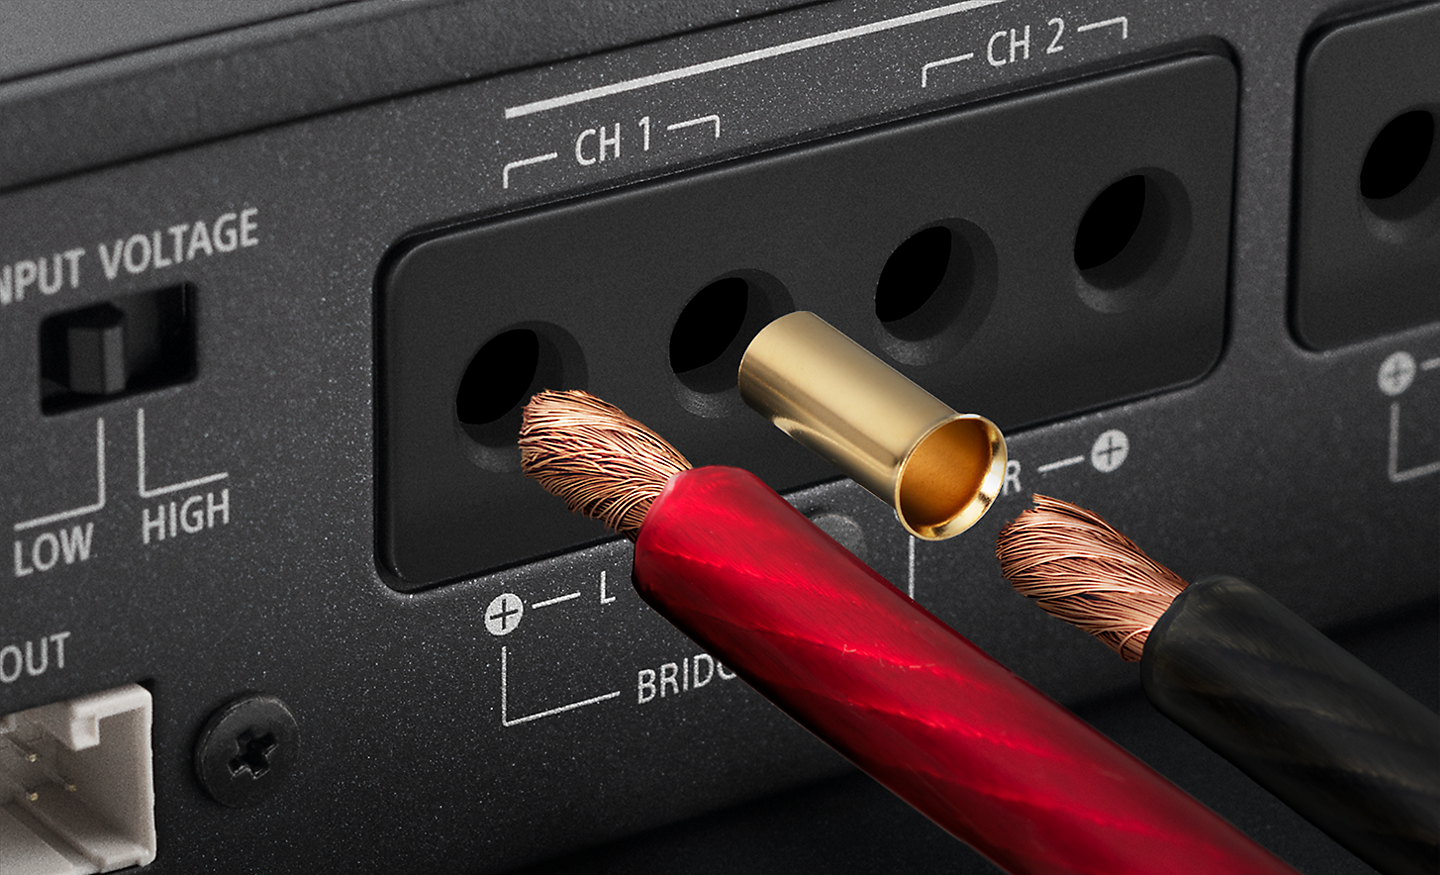 Close up image of four CH ports with red and black cables entering two of the holes